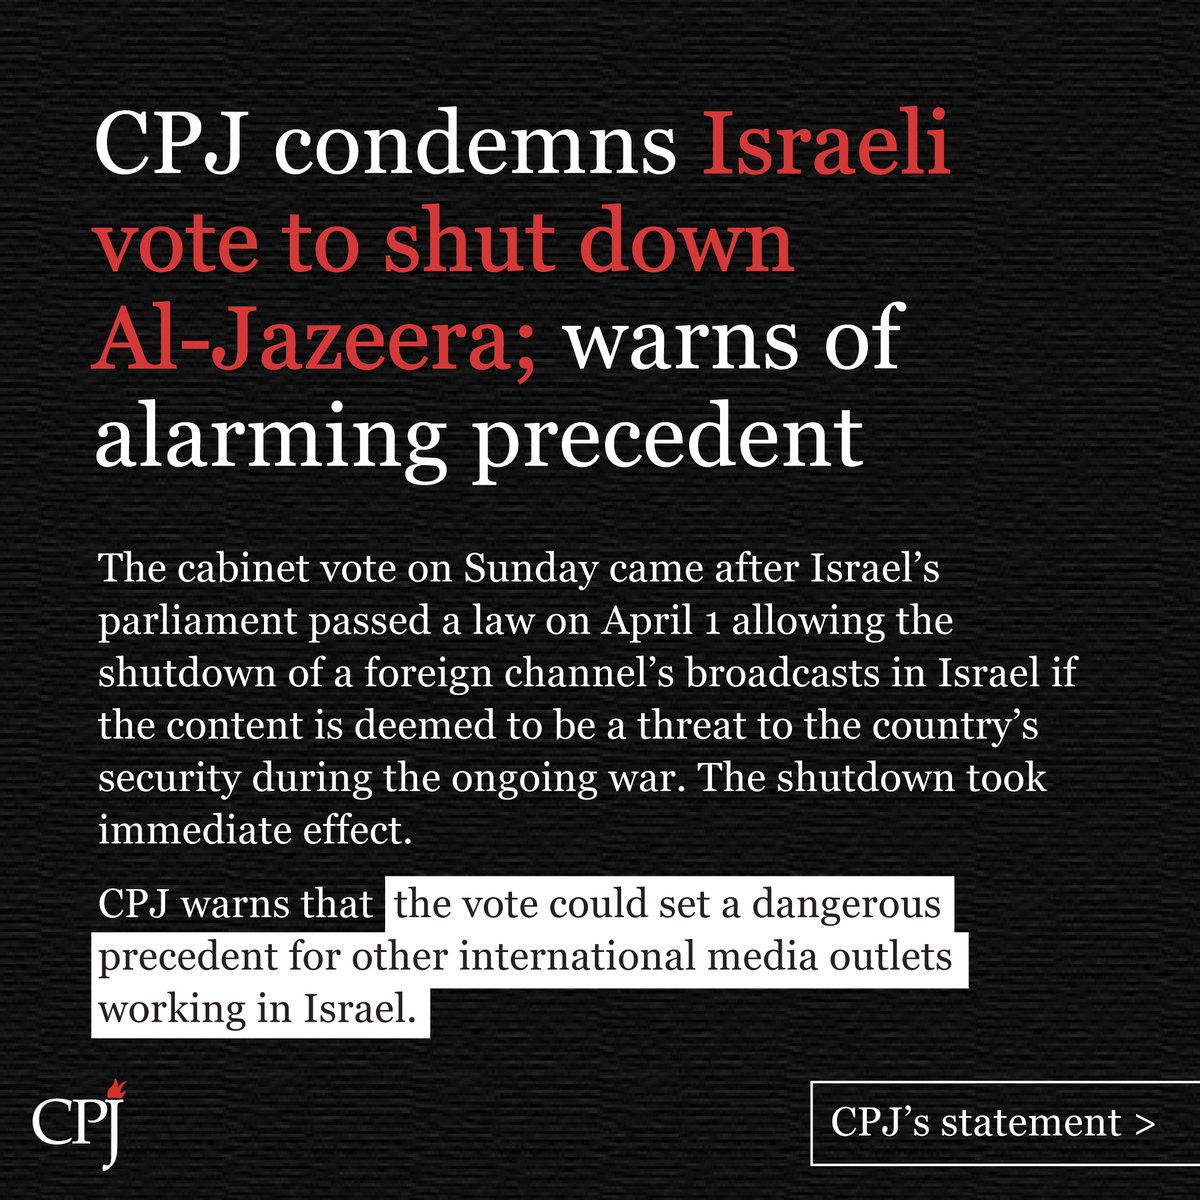 We condemn the Israeli cabinet’s decision to shut down Al-Jazeera’s operations in Israel and warn that the vote could set a dangerous precedent for other international media outlets working in Israel. #Israel #Gaza #PressFreedom #Censorship